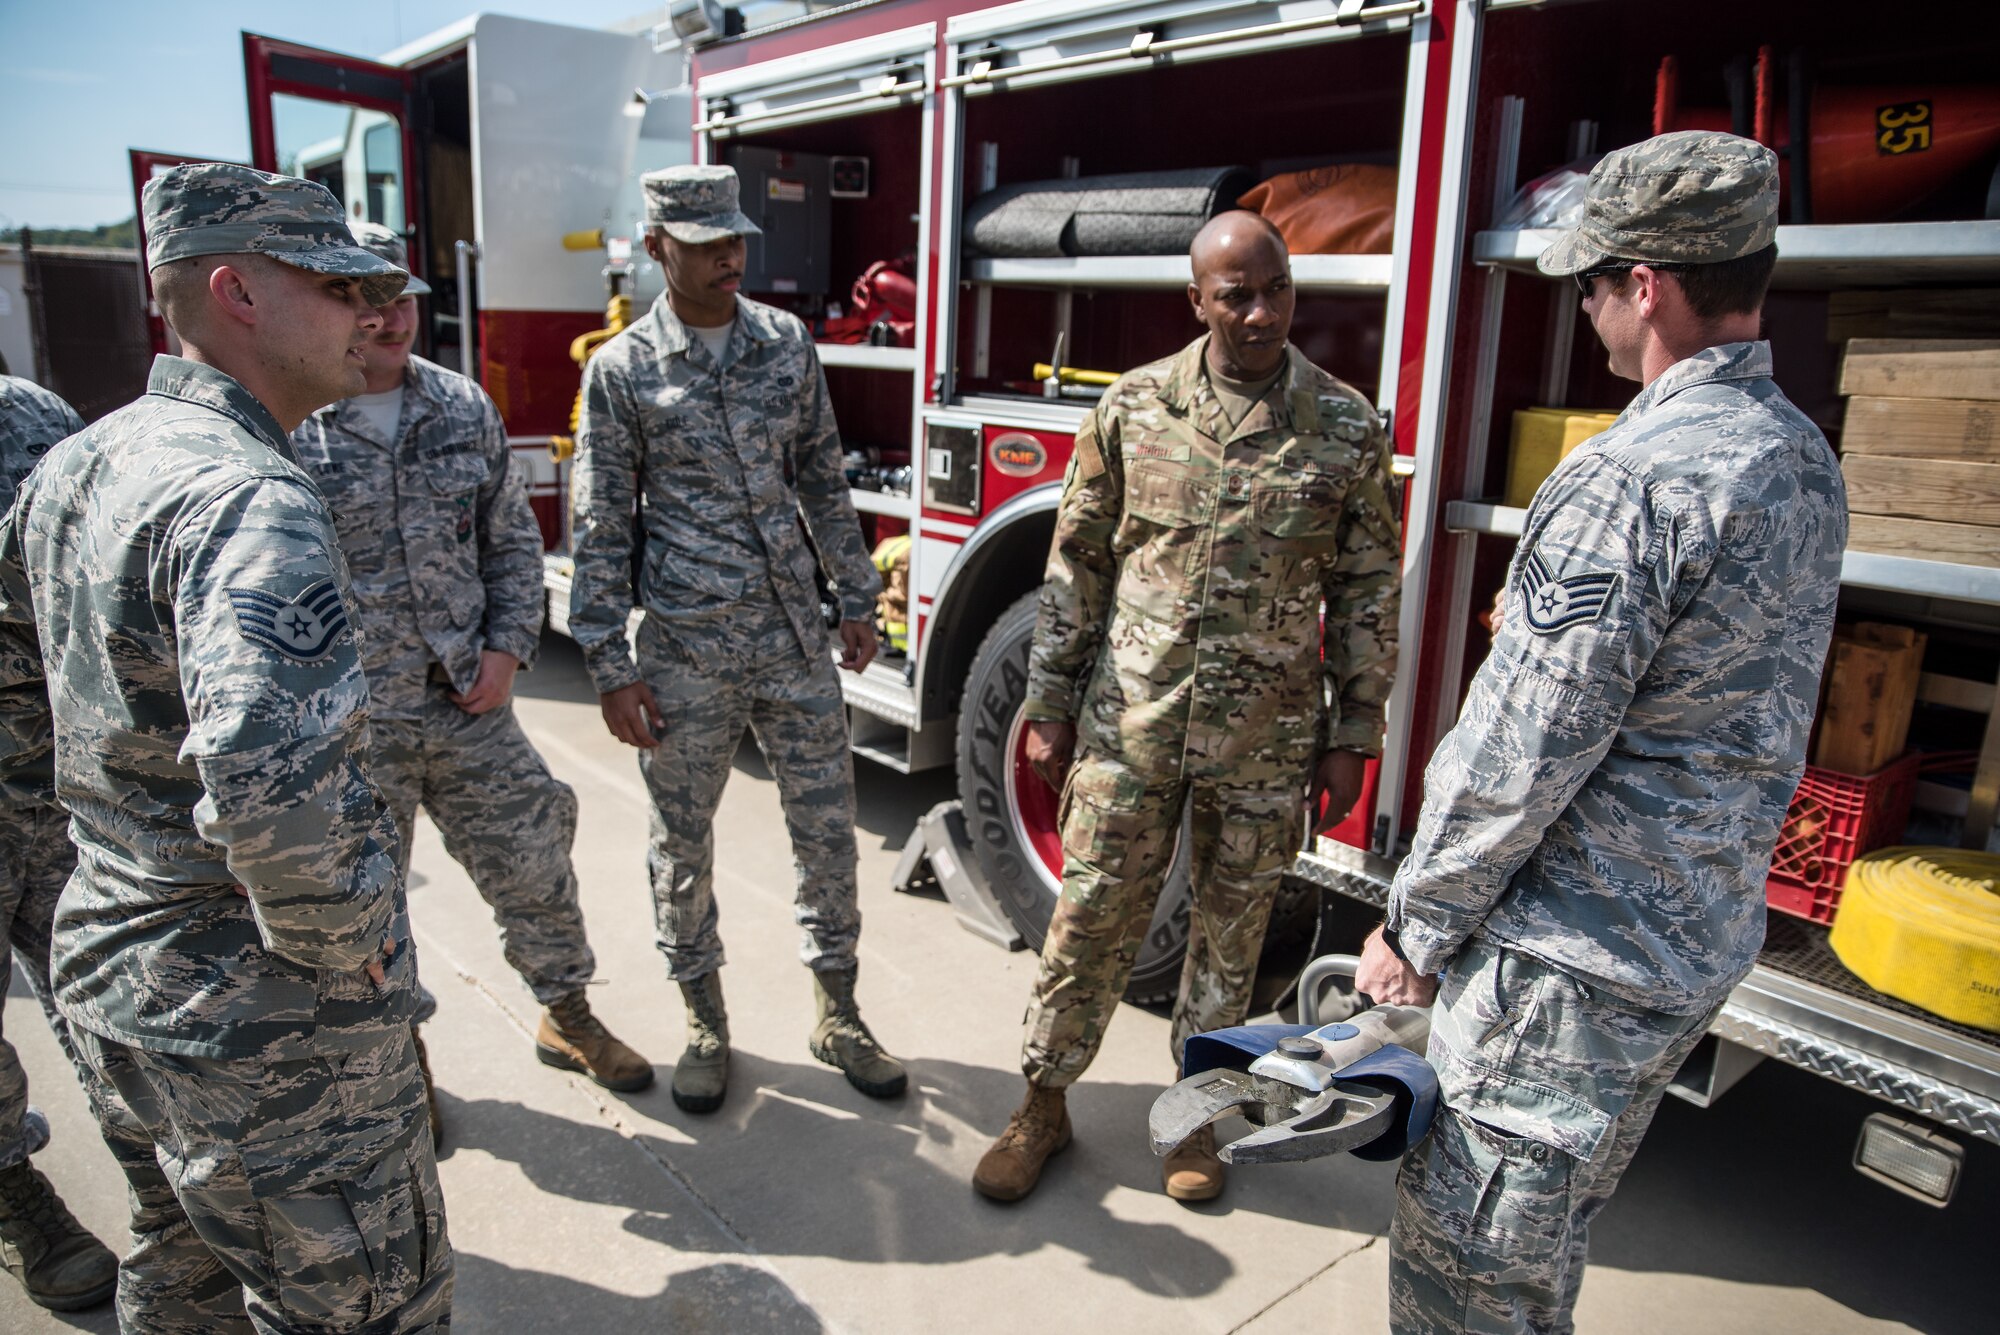 Chief Master Sergeant of the Air Force Kaleth O. Wright meets with 188th Wing firefighters at Ebbing Air National Guard Base, Fort Smith, Ark., Oct. 5, 2019. Wright spoke with the Airmen about issues they face in their career fields, and possible solutions. (U.S. Air National Guard photo by Staff Sgt. Matthew Matlock)